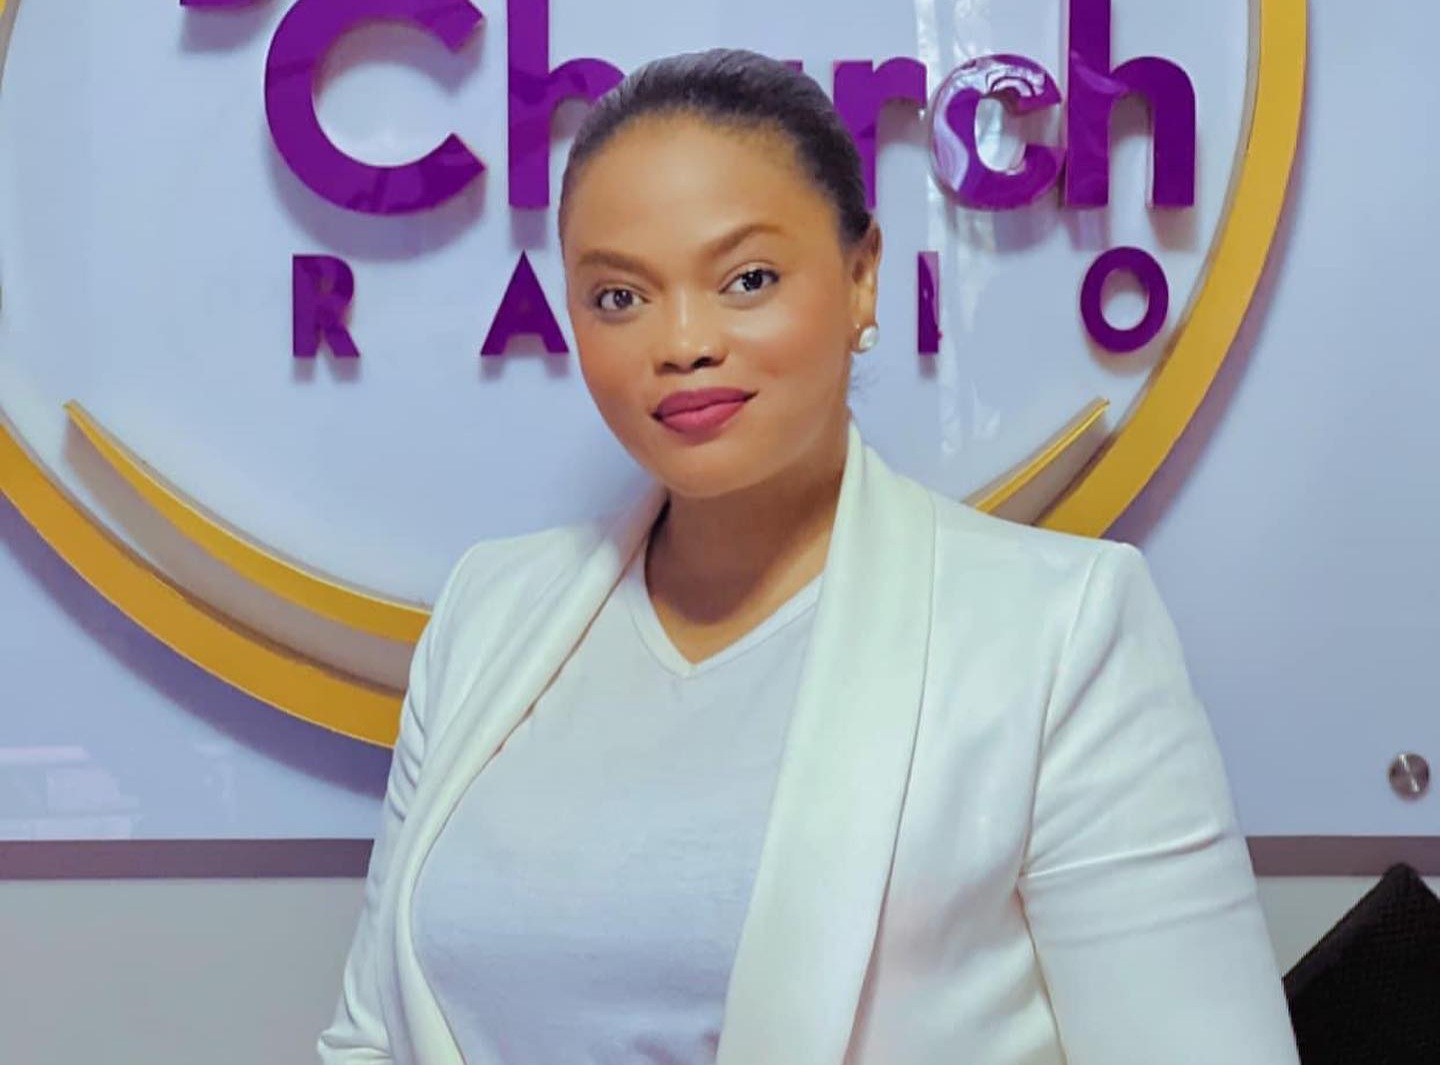 Gospel musician Gabbie Ntaate says she is not ready for marriage.